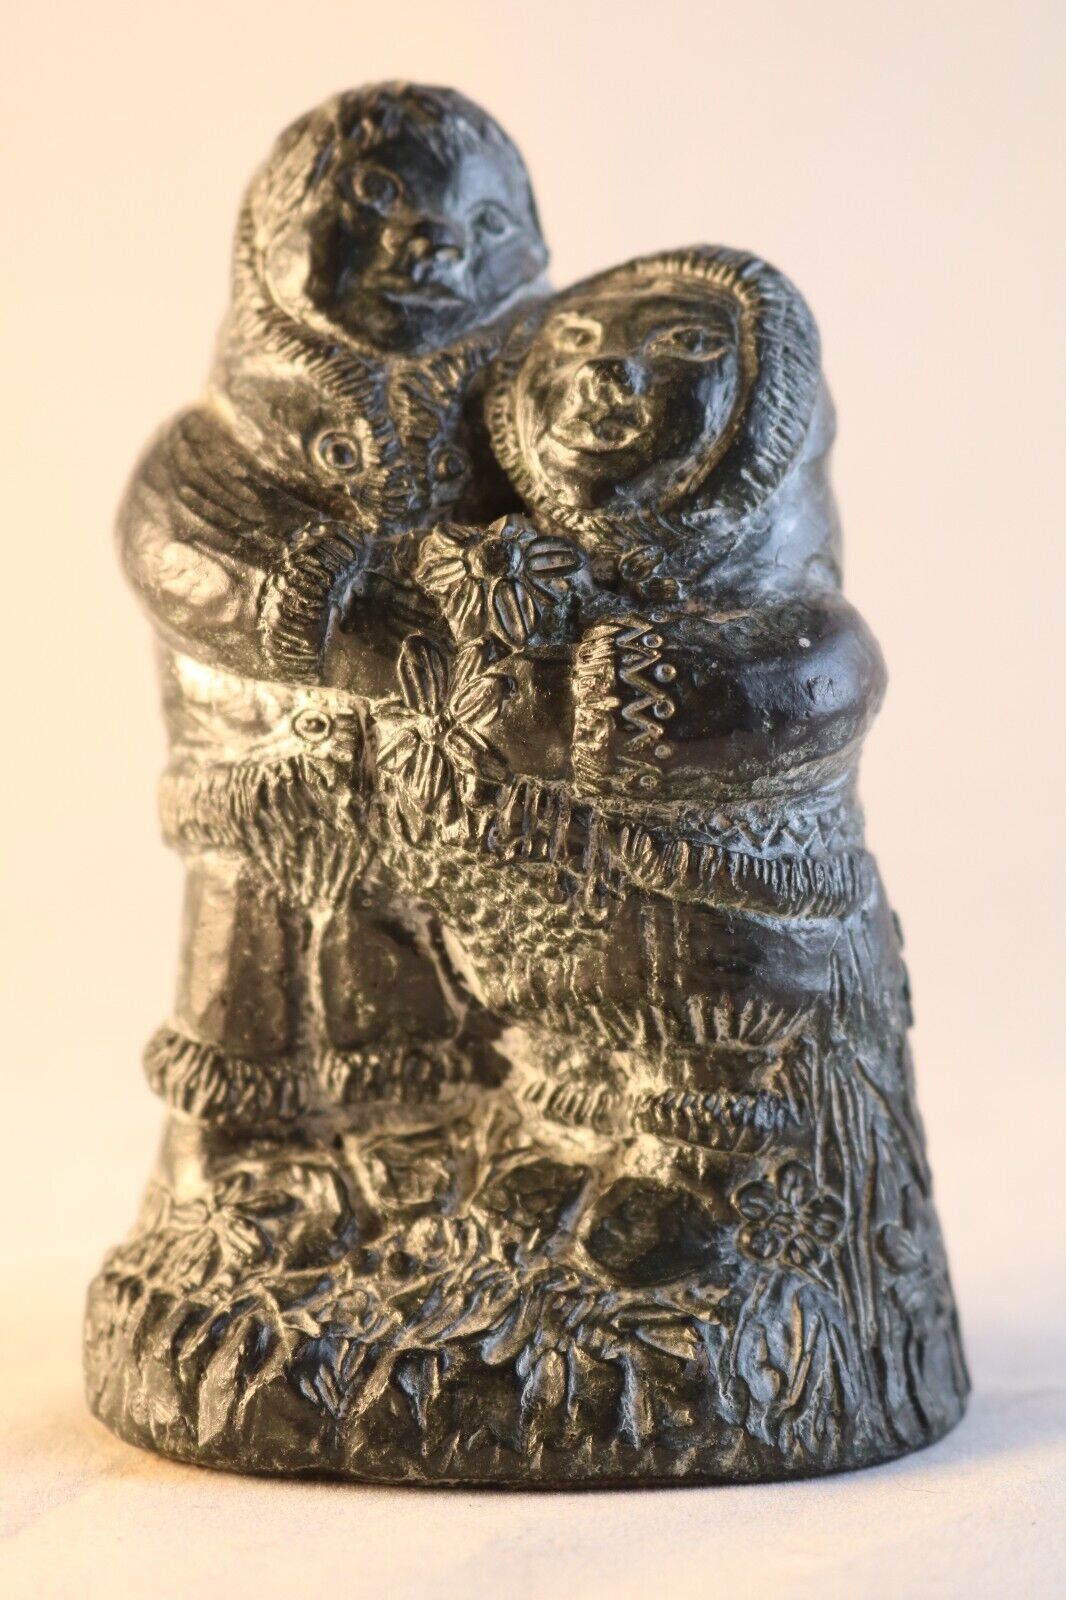 A WOLF ORIGINAL HAND CARVED NORTHERN NATIVE AMERICAN INUIT COUPLE IN LOVE